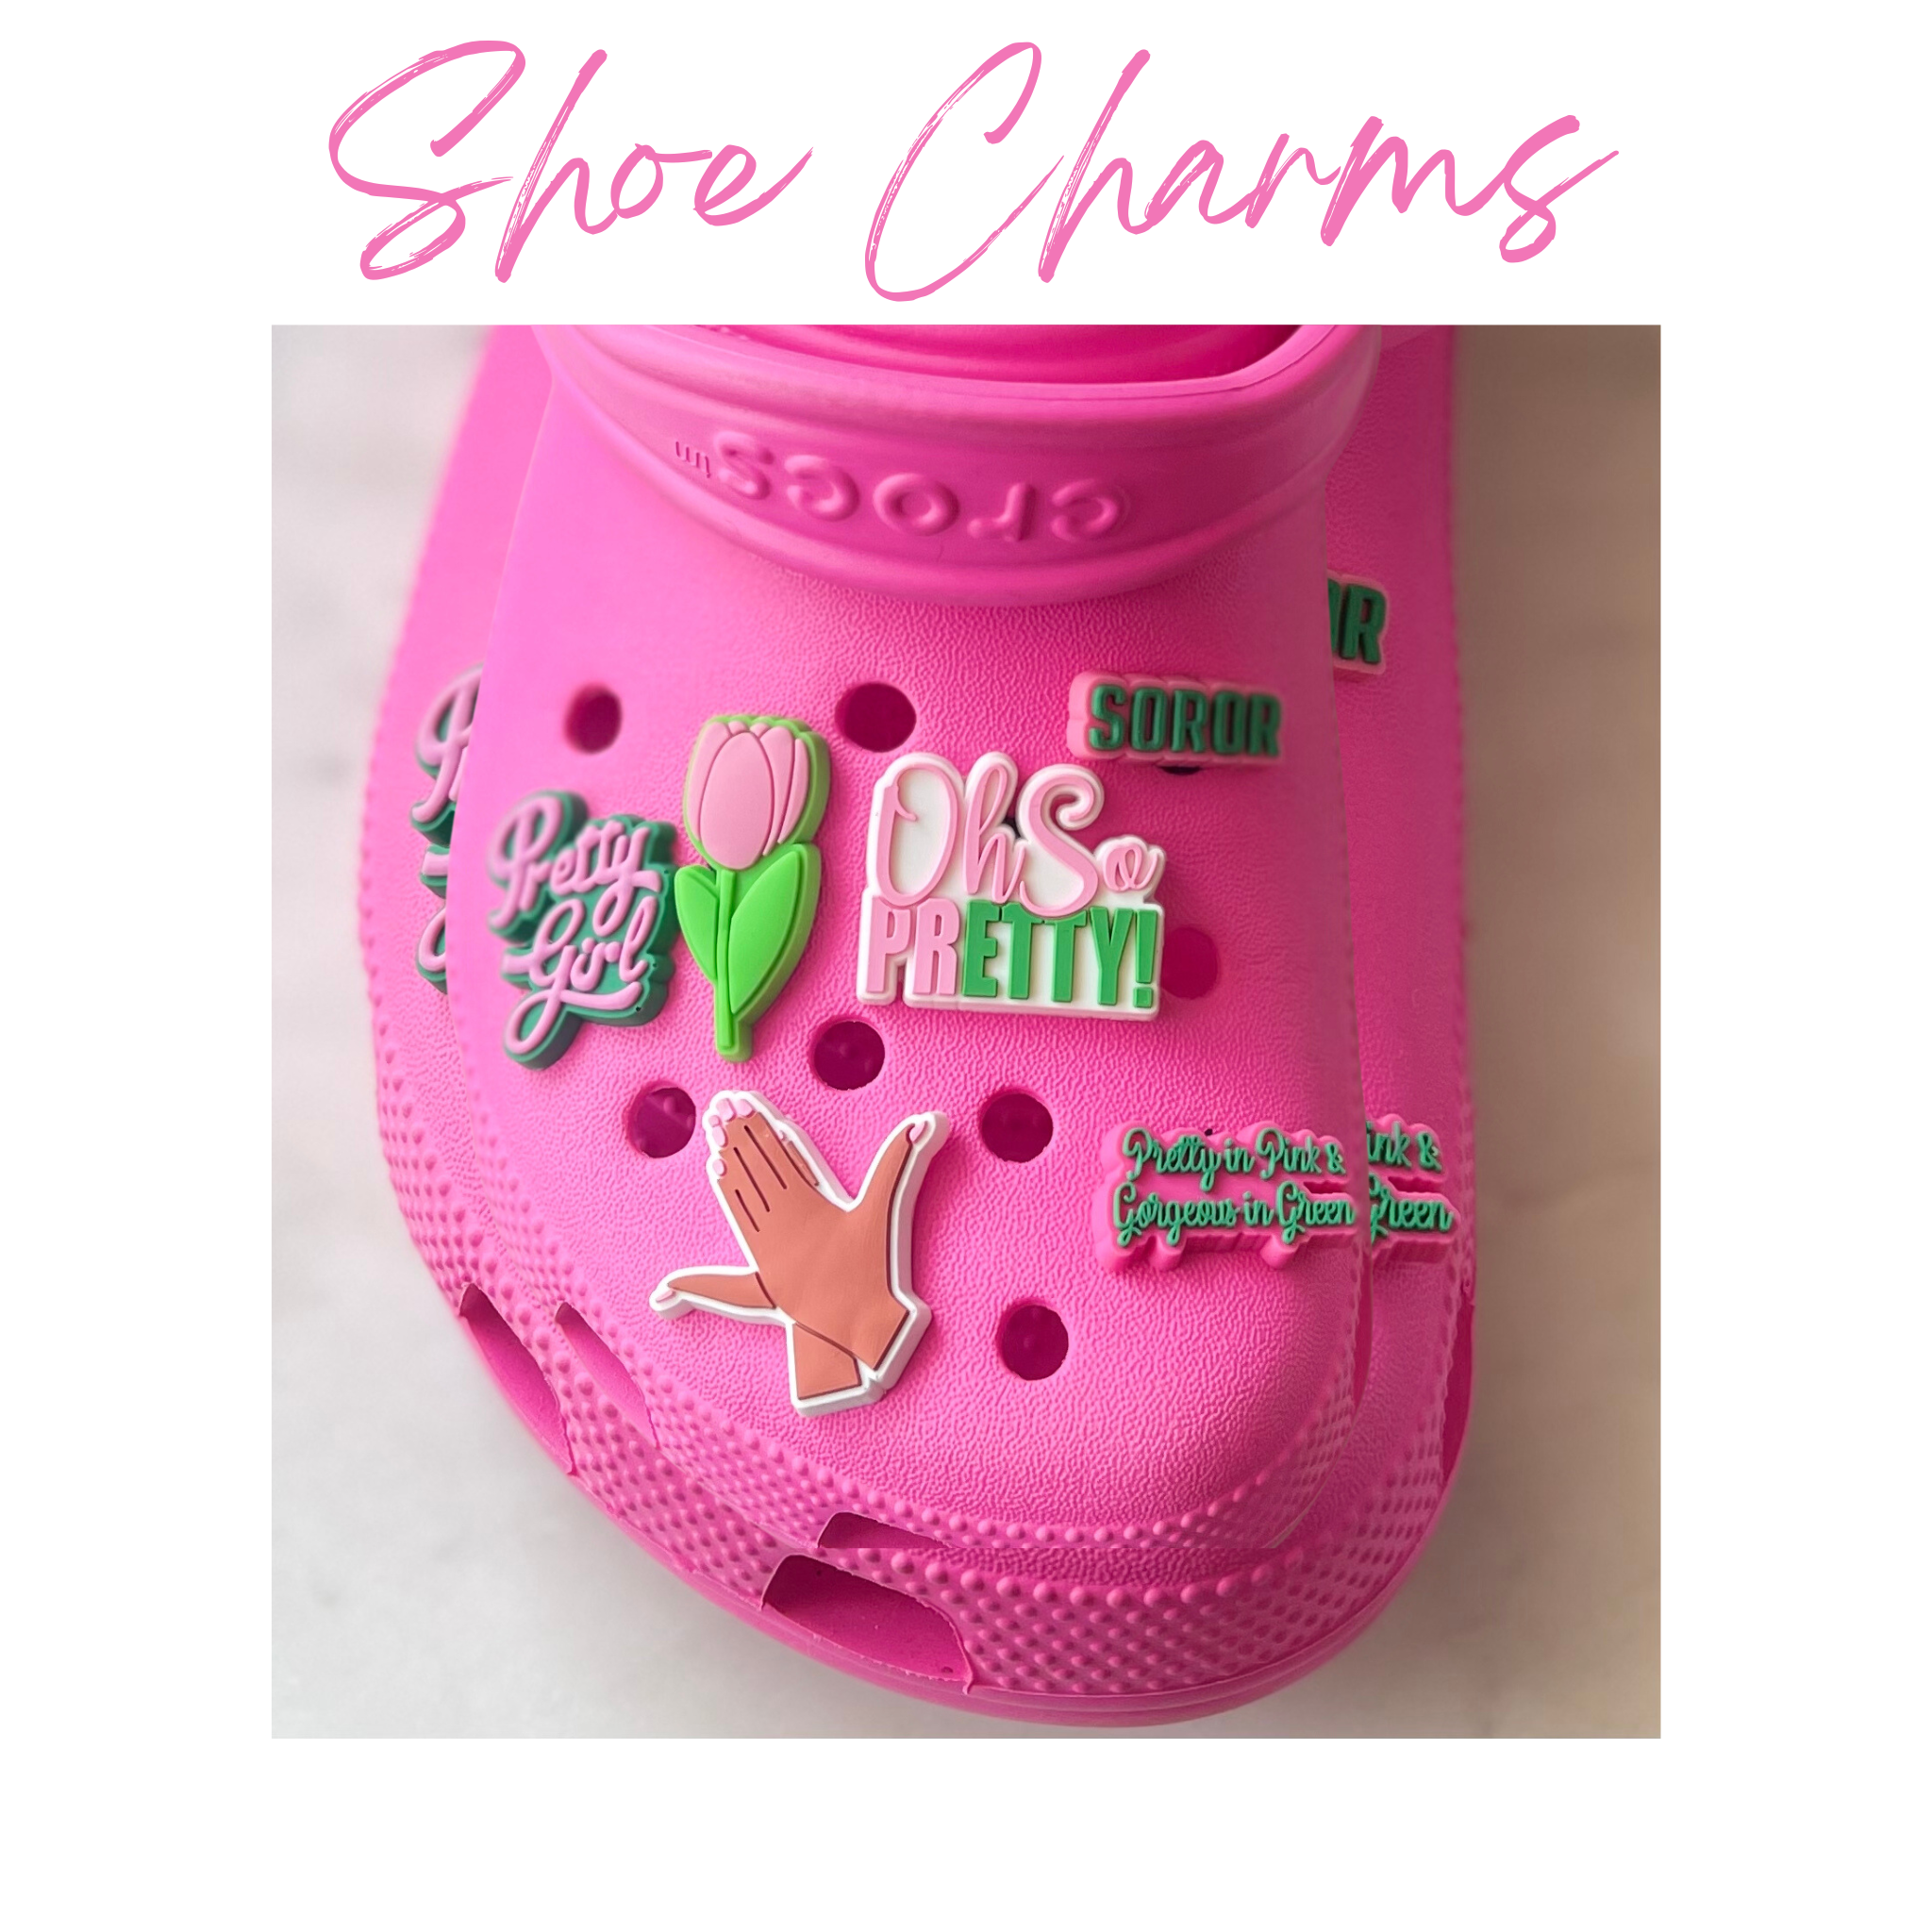 Croc Charms  Pretty in Pink & Gorgeous in Green